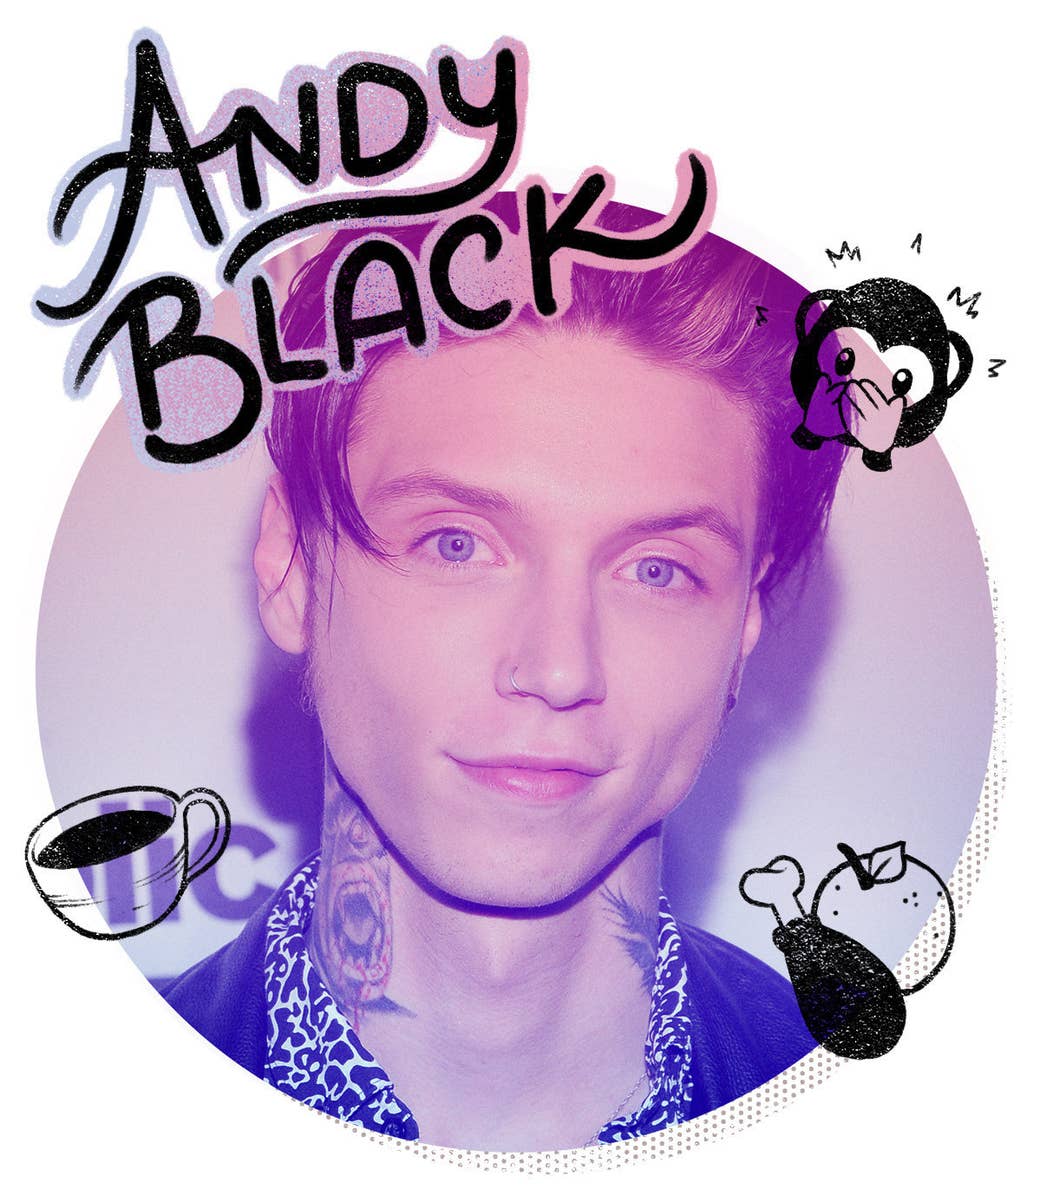 30 Things You Should Know About Andy Black